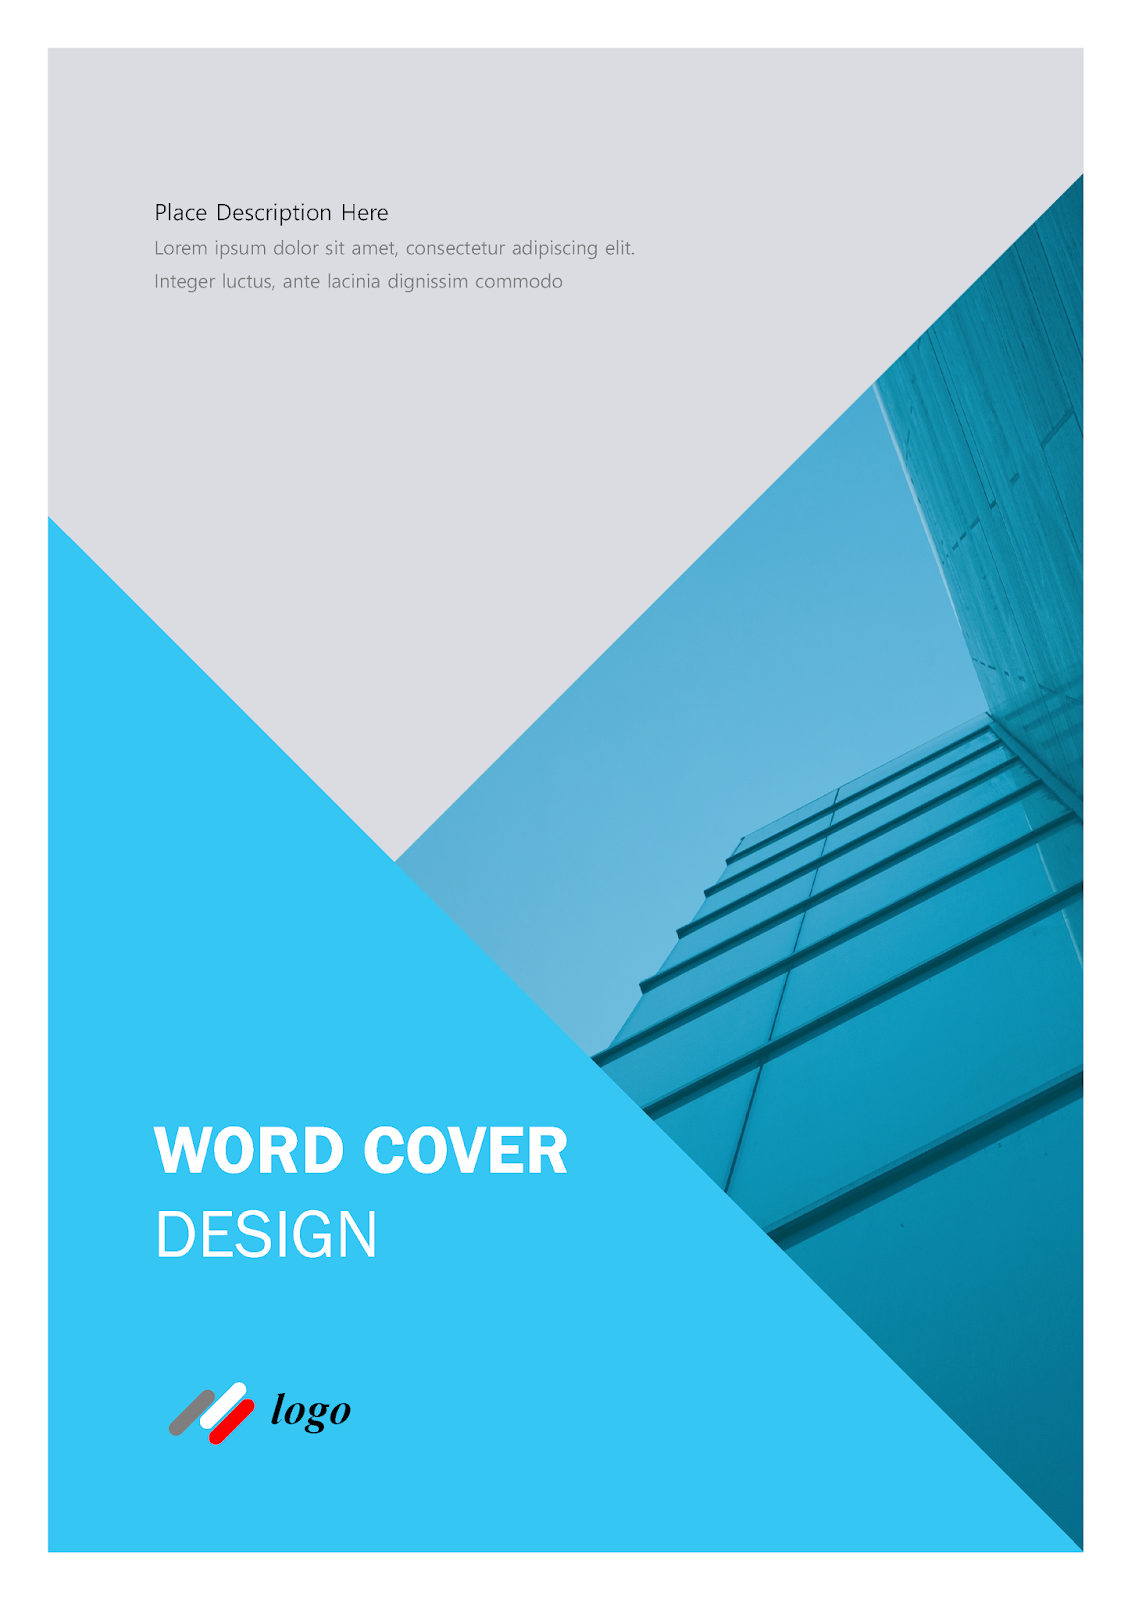 ms word cover page template designs free download